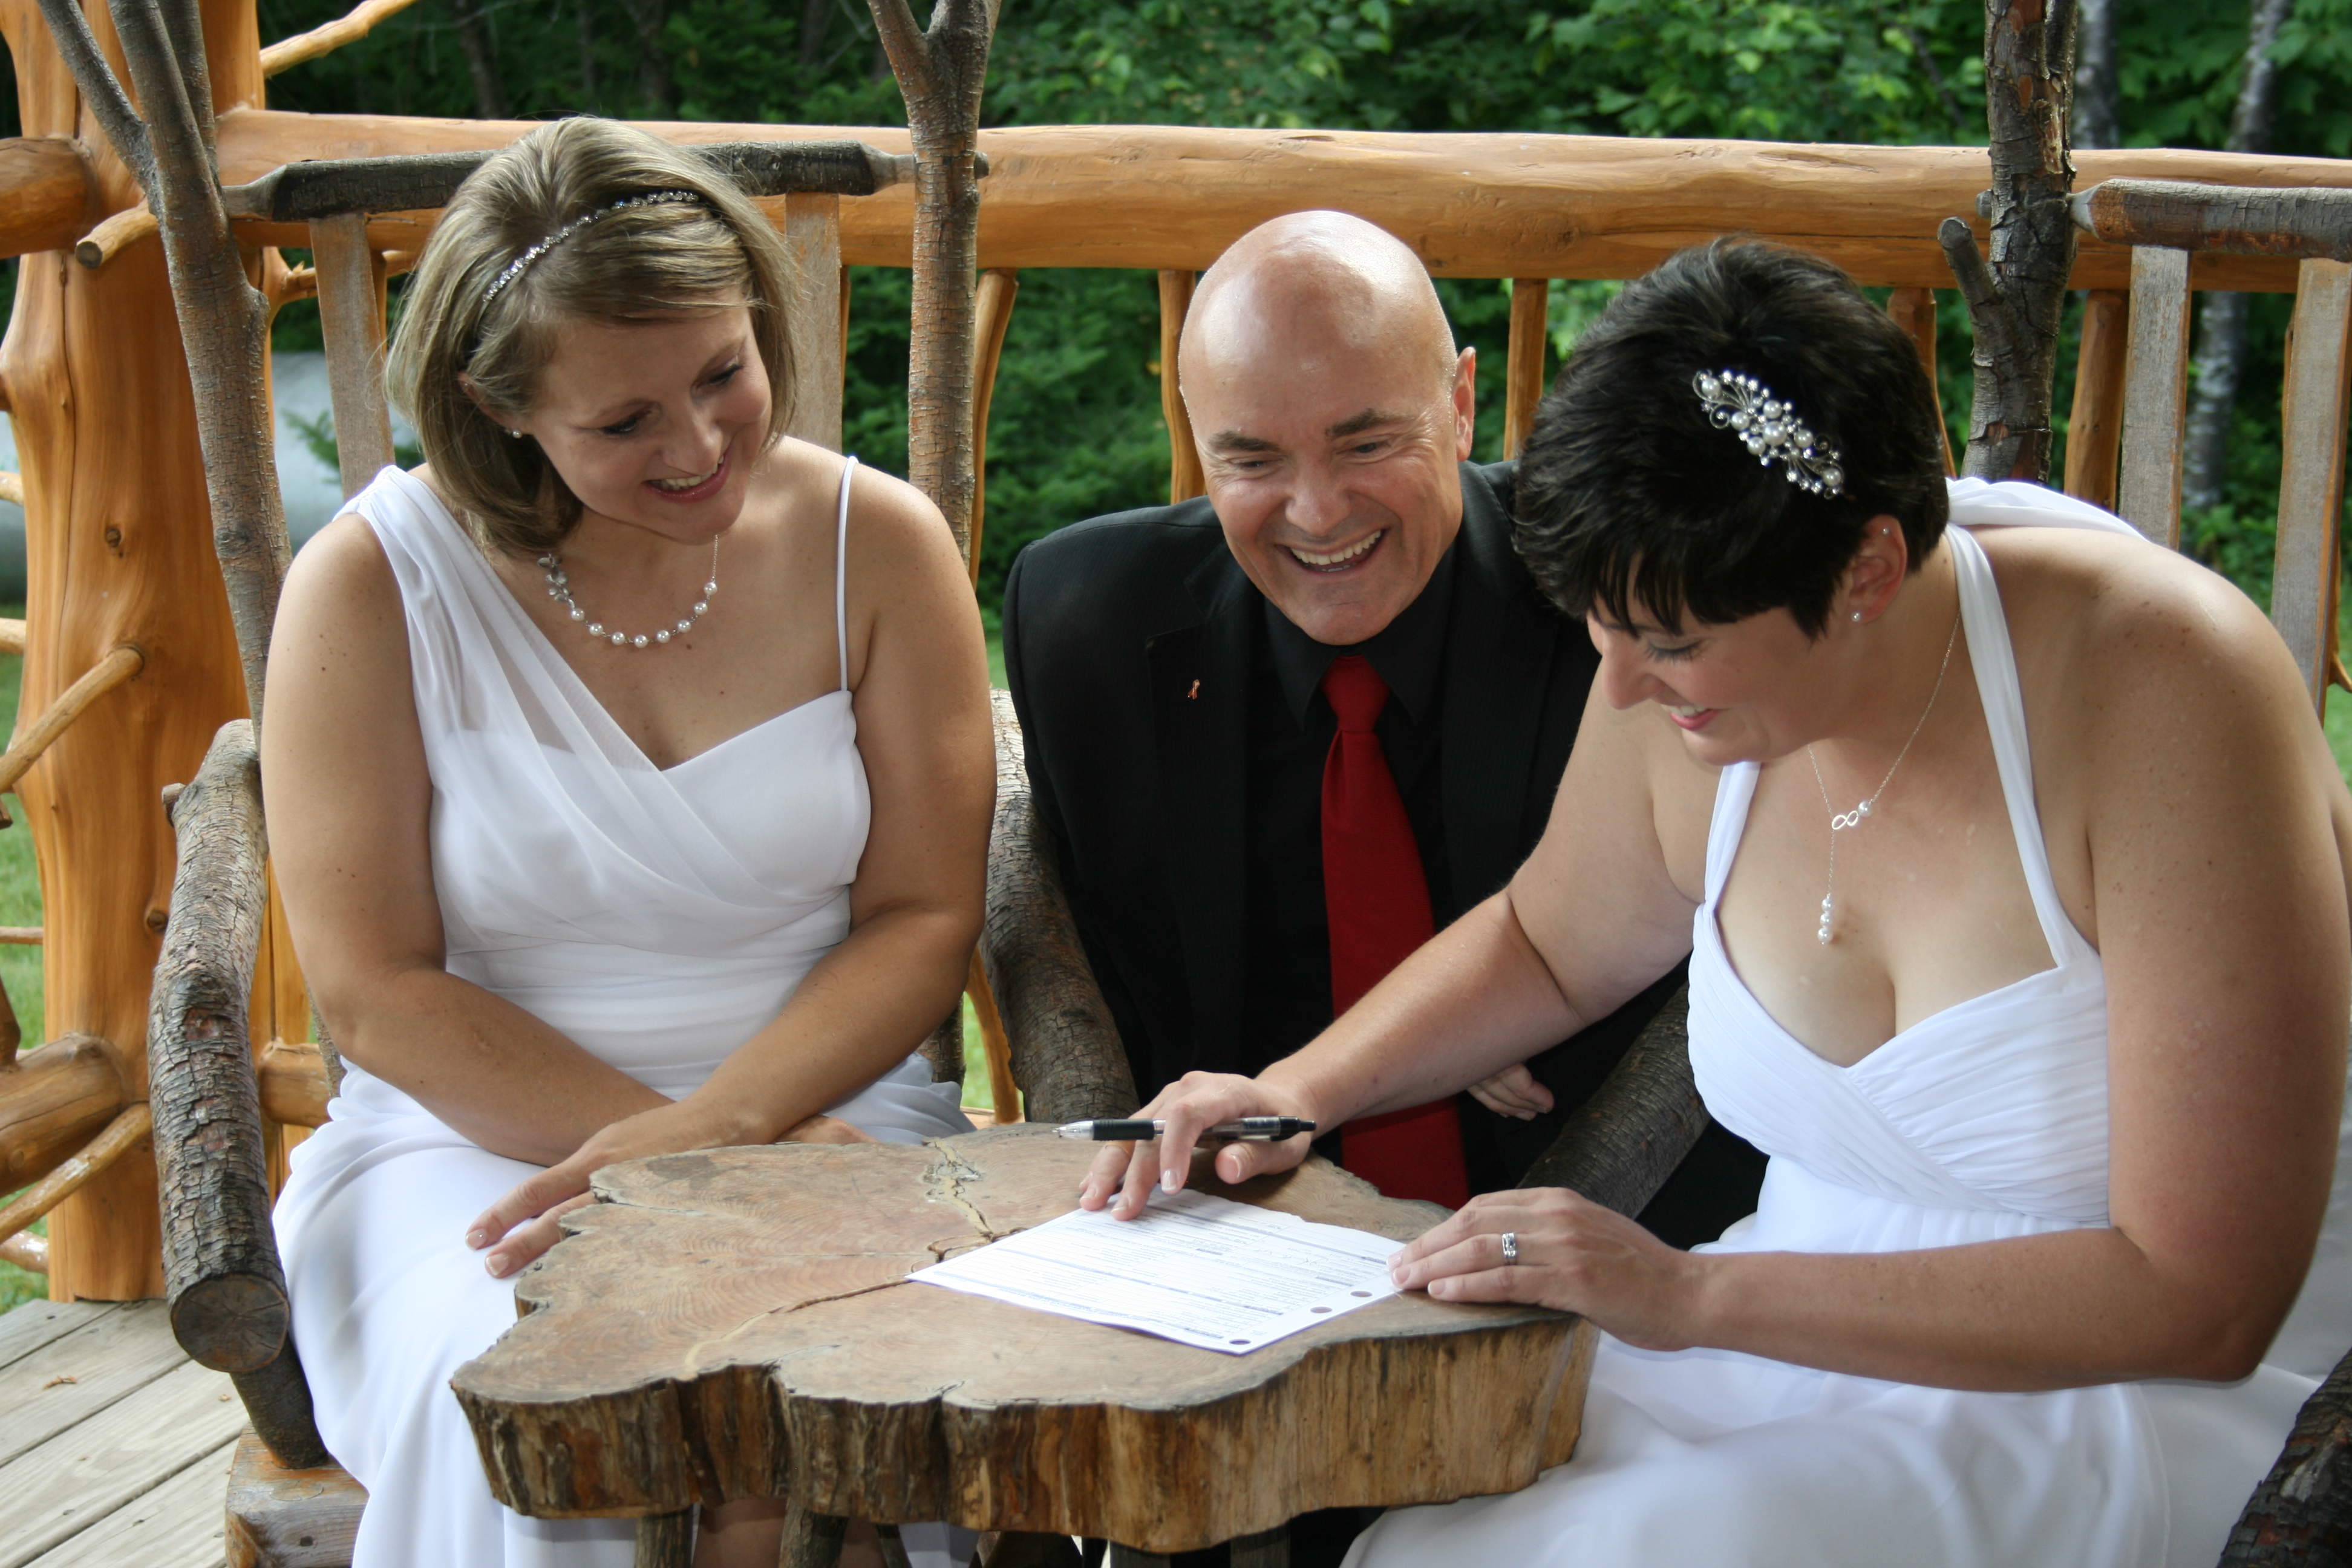 Greg Trulson, Justice of the Peace, Vermont Wedding Officiant, Elopements, Moose Meadow Lodge